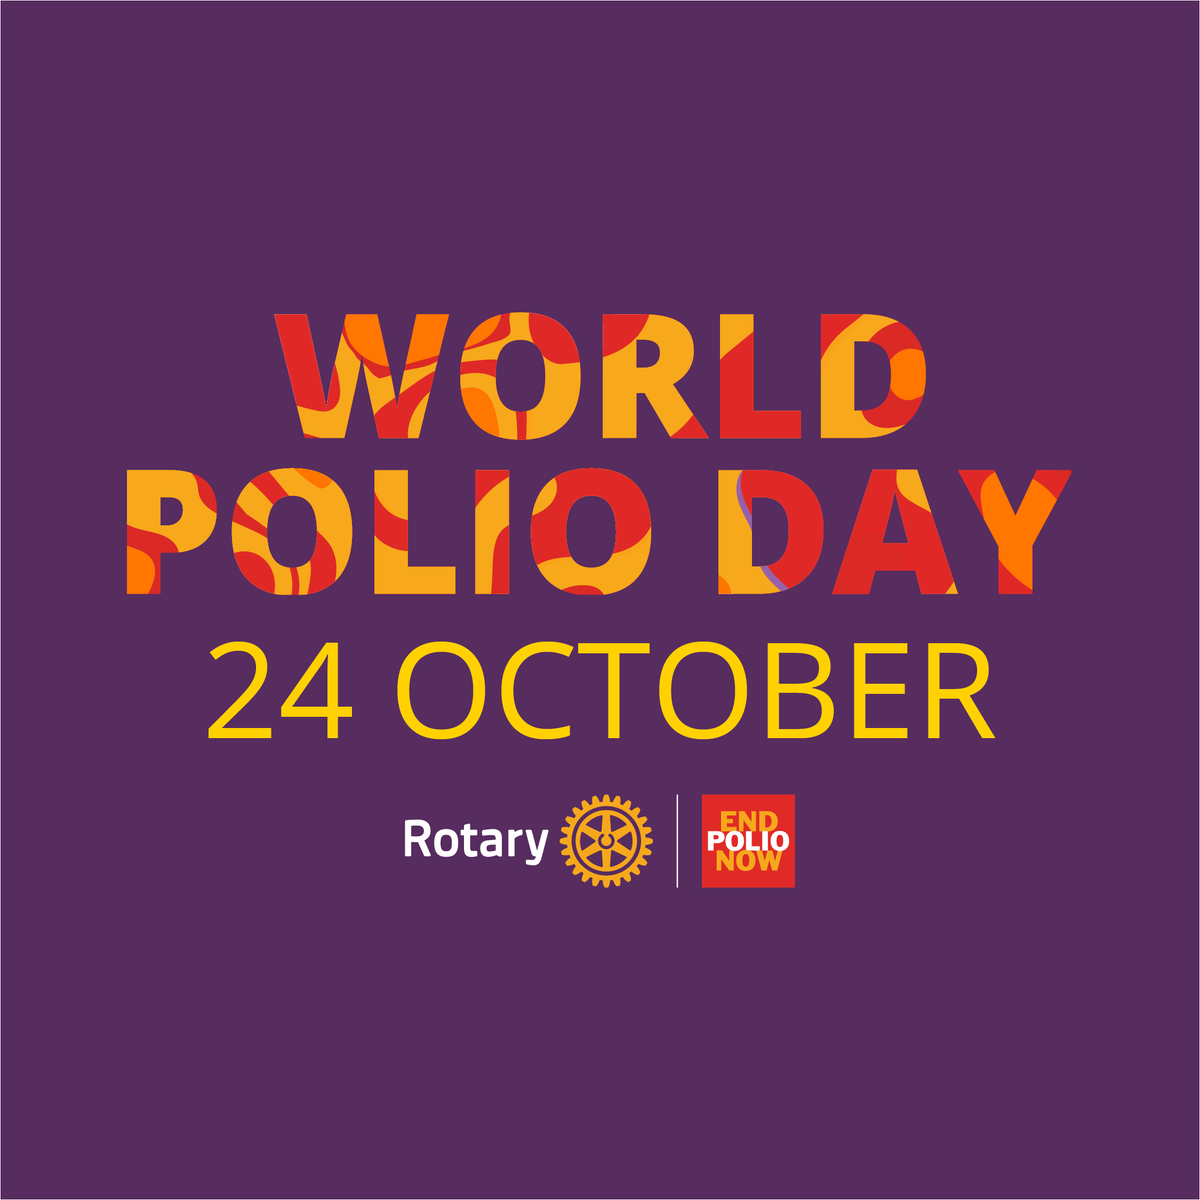 The  Blyth Valley Rotary in partnership with the Southwold Rainbows, Brownies and Guides will be planting crocus bulbs at Reydon Village Hall  Friday 27th October   #Purple4Polio rotarygbi.org/projects/purpl…     Thank you to the Southwold Rainbows, Brownies, and Guides #endpolio